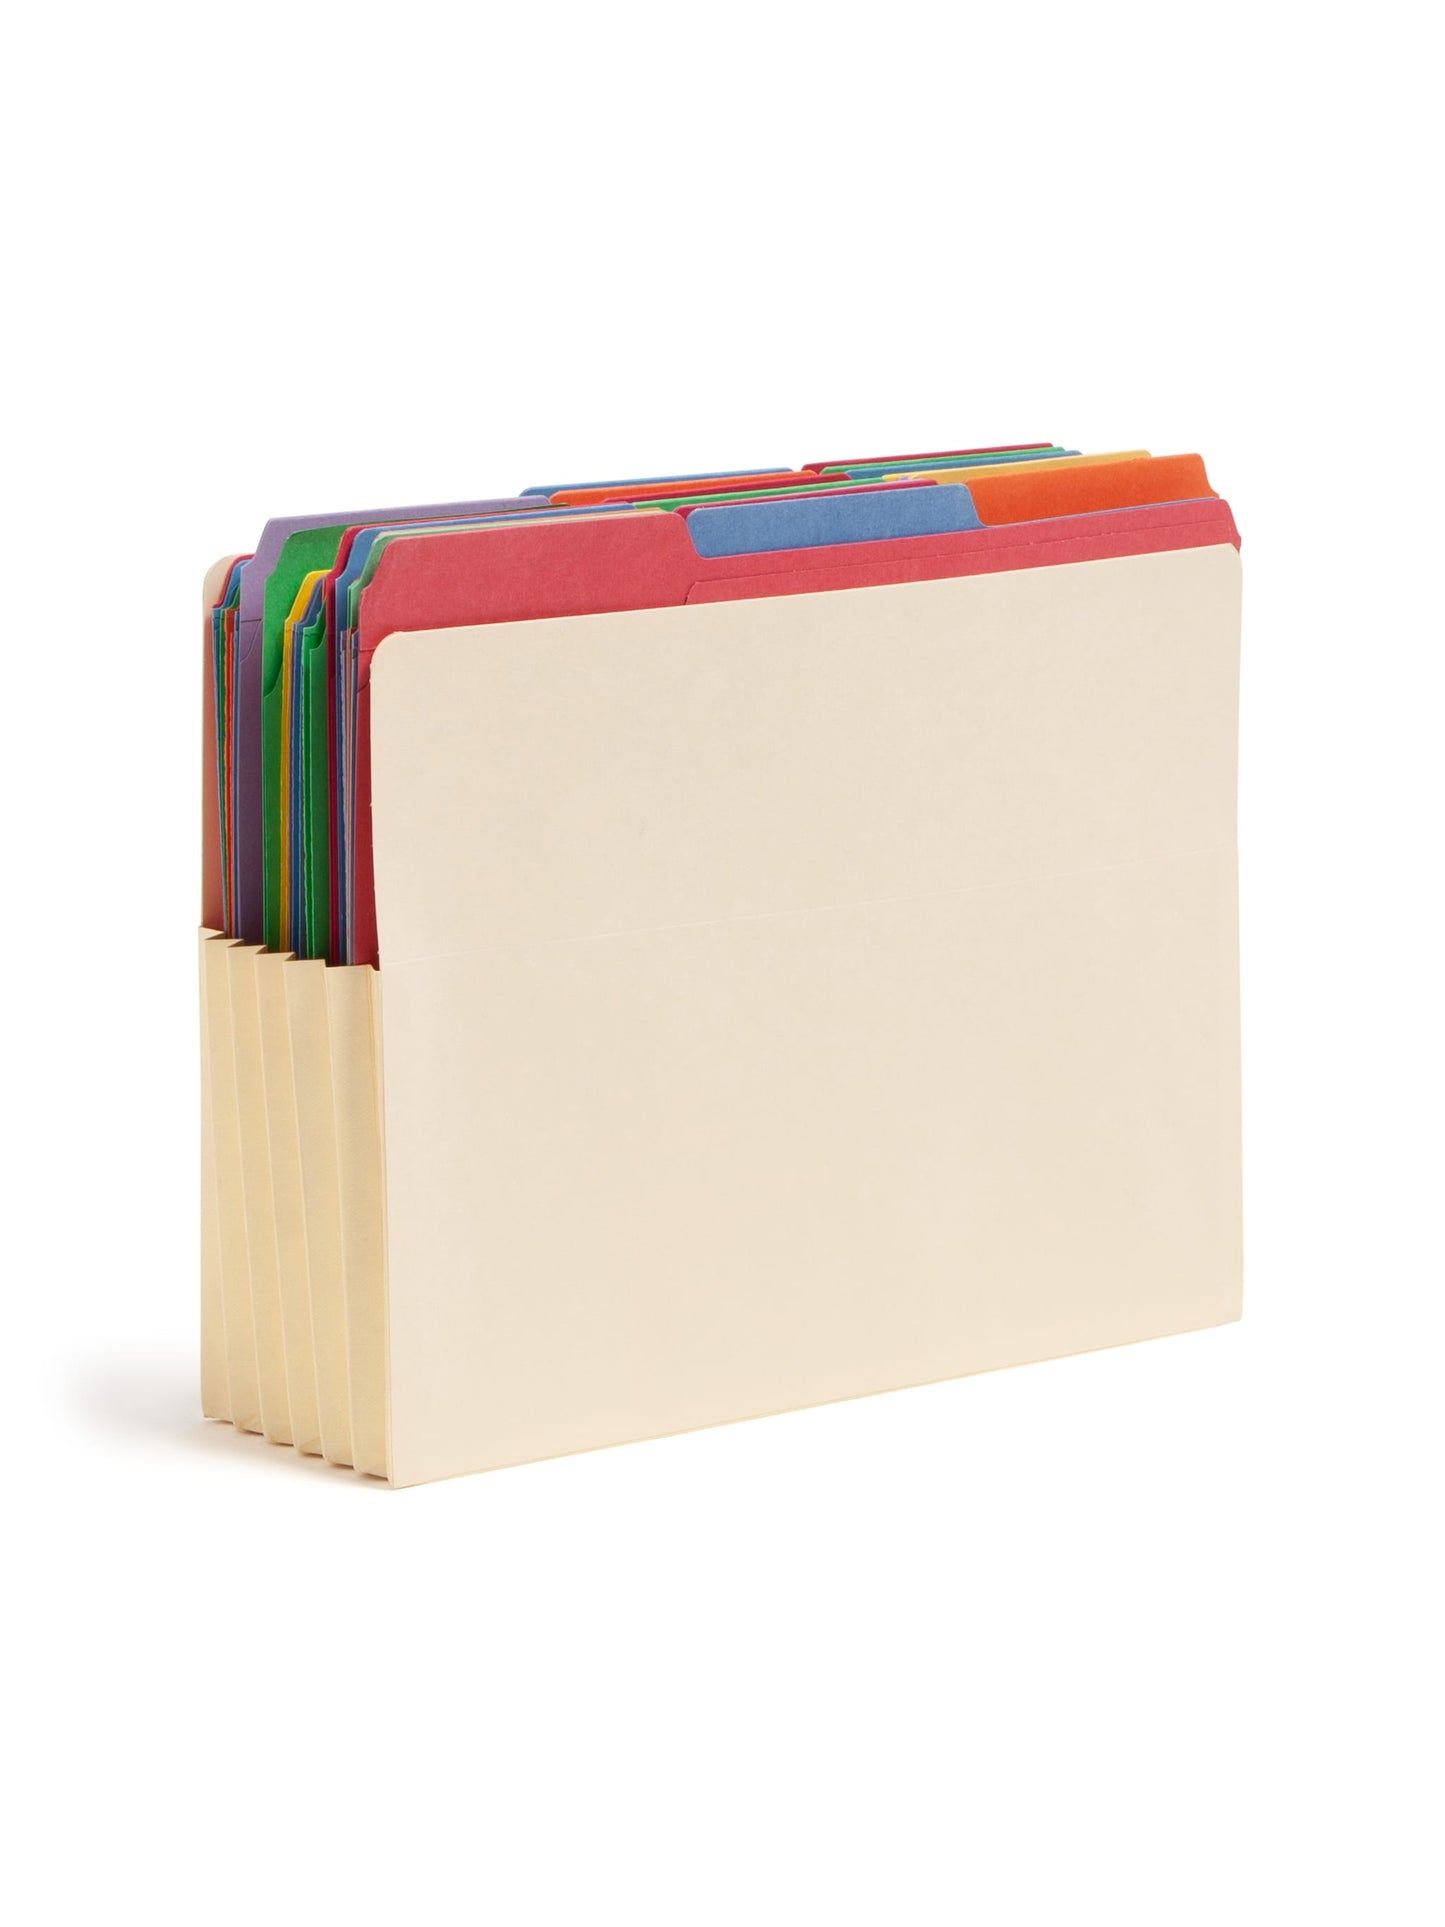 End Tab Convertible File Pockets, Straight-Cut Tab, 5-1/4 inch Expansion, Manila Color, Letter Size, Set of 0, 30086486751750